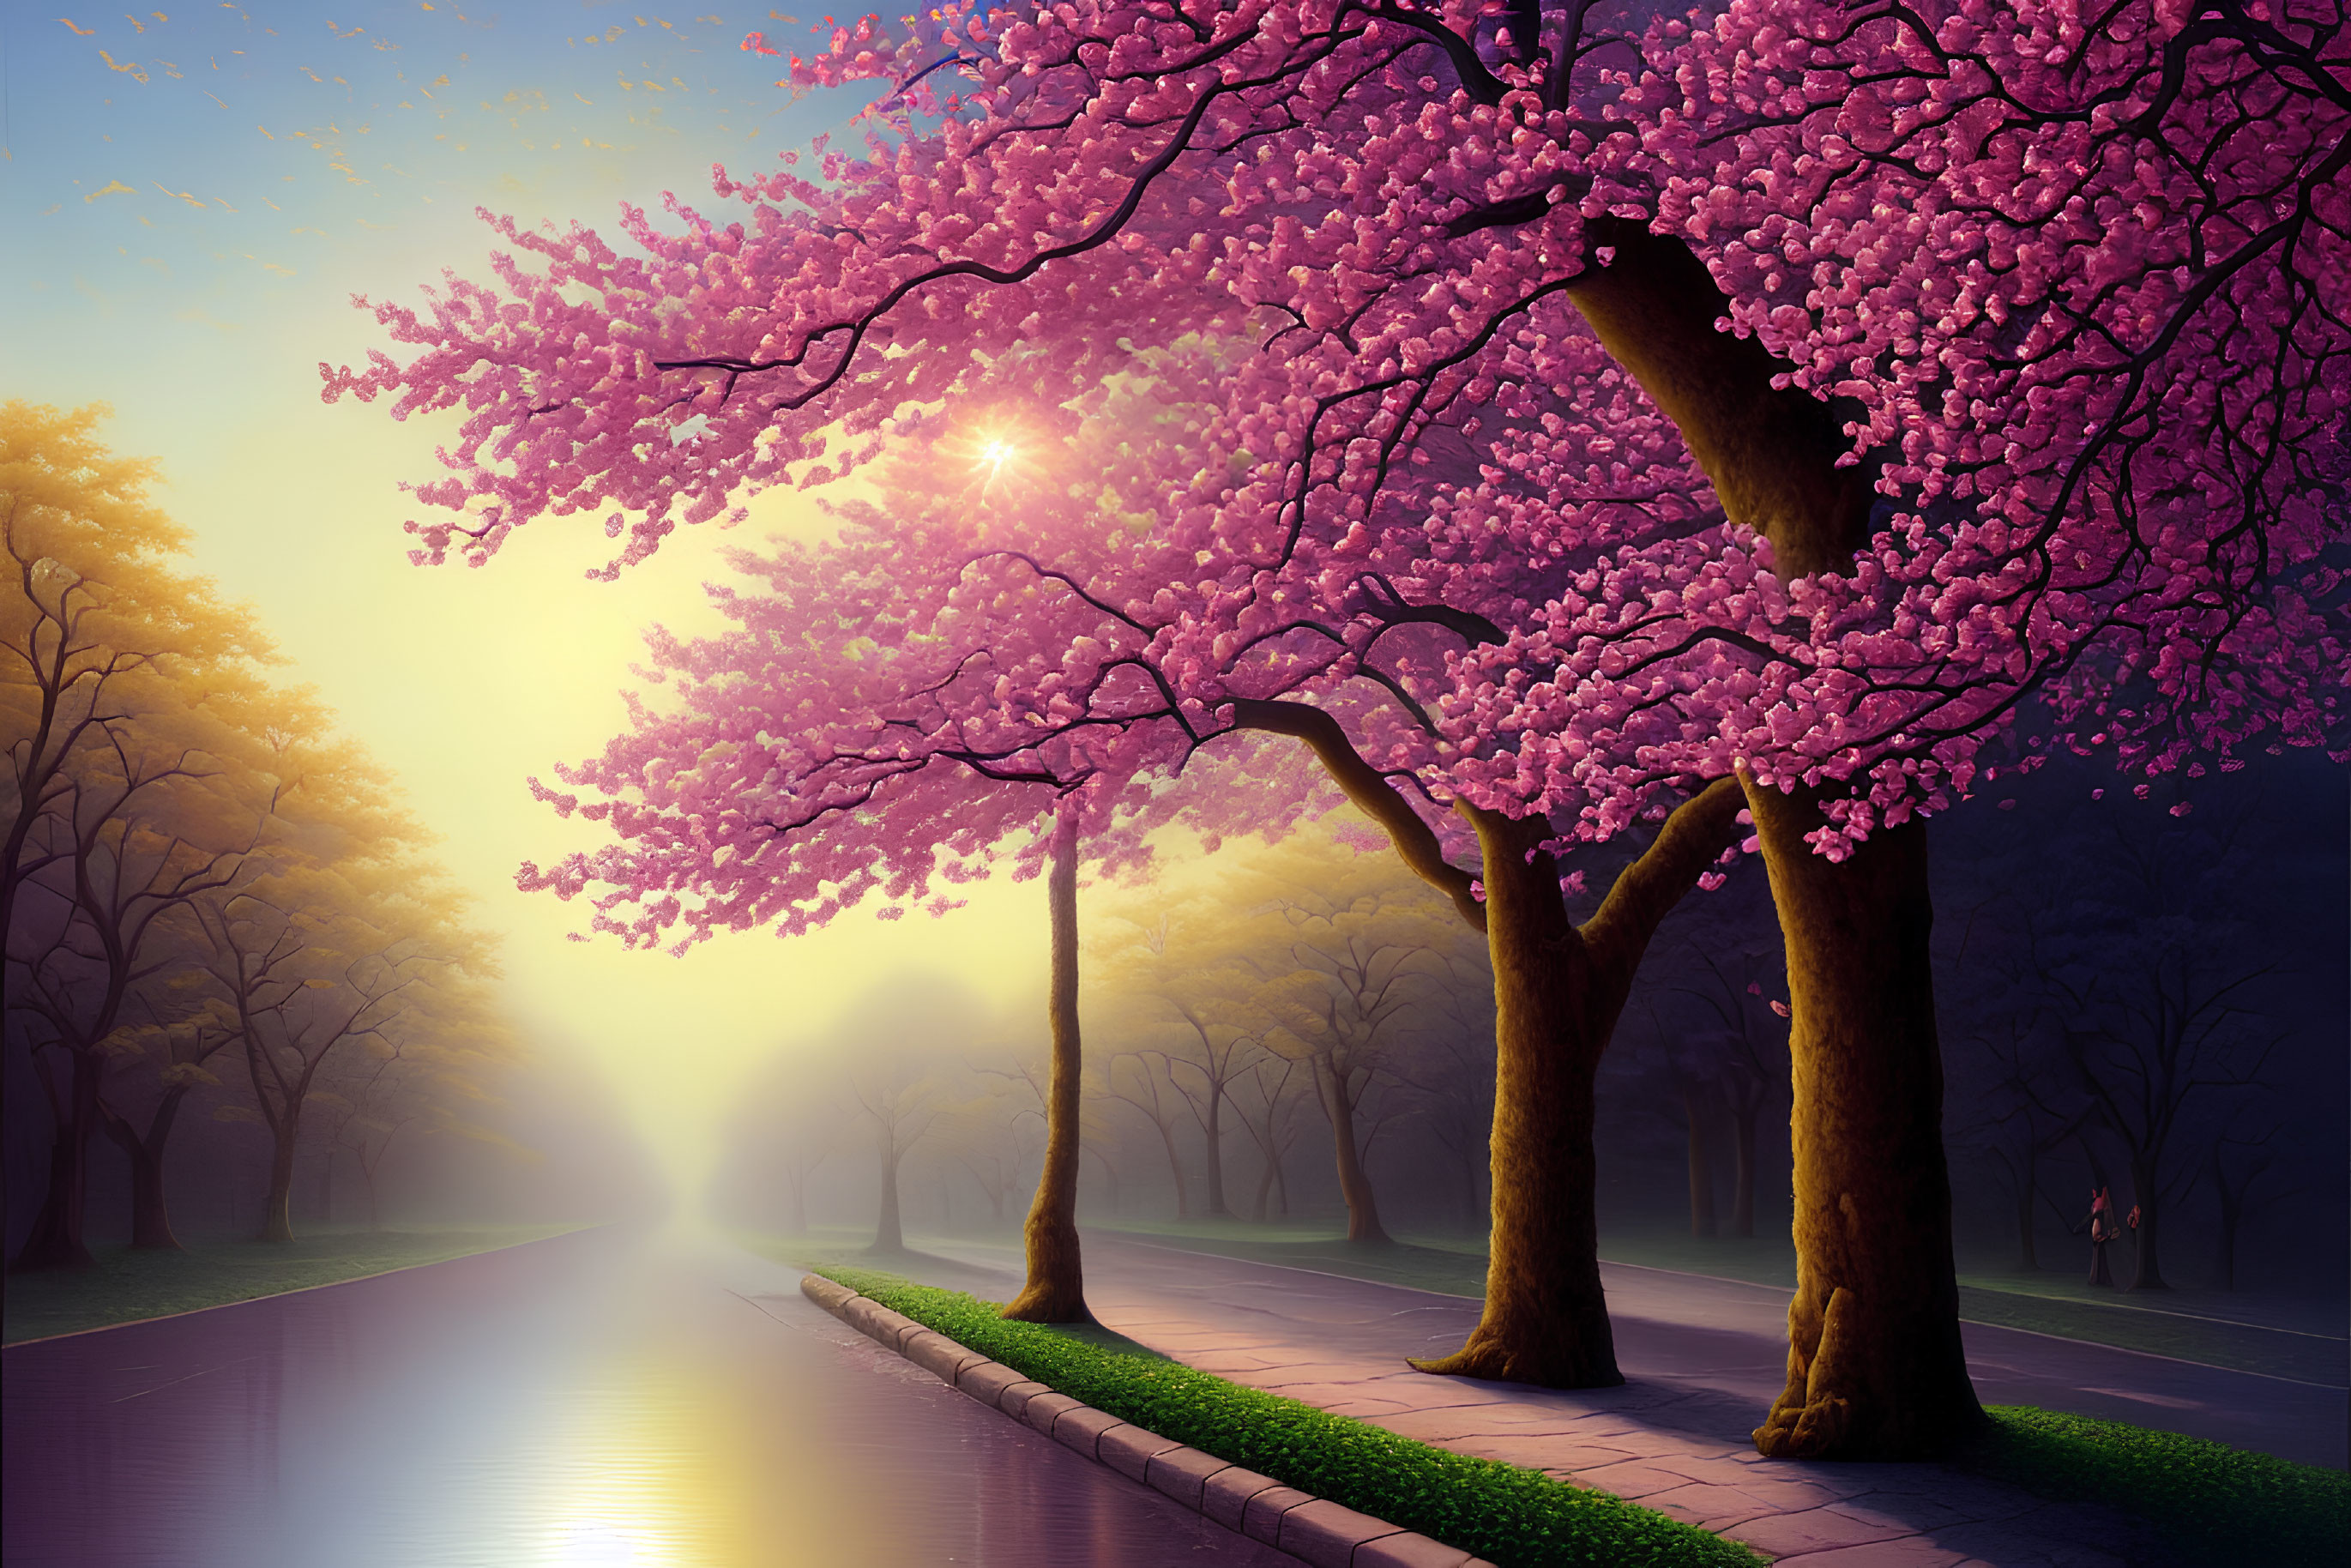 Tranquil Park Scene with Pink Cherry Blossoms and Sunrise Reflection